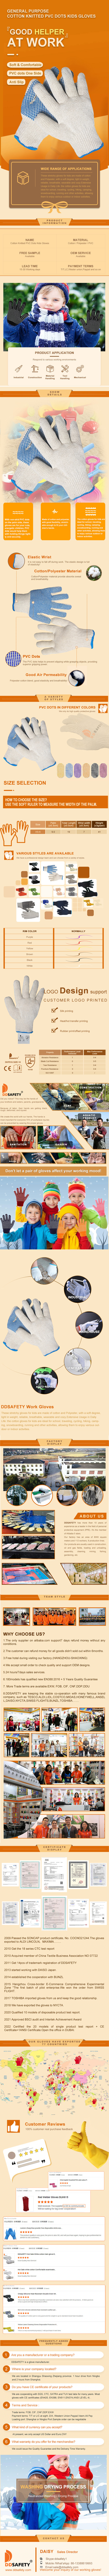 Wear-resistant And Breathable White Cotton Children Gloves String Knit Gloves for Kids with Rubber Grip Dots -DKP916 Wear-resistant And Breathable White Cotton Children Gloves String Knit Gloves for Kids with Rubber Grip Dots -DKP916 pvc dot gloves,Children Gloves String Knit,White Cotton Children Gloves